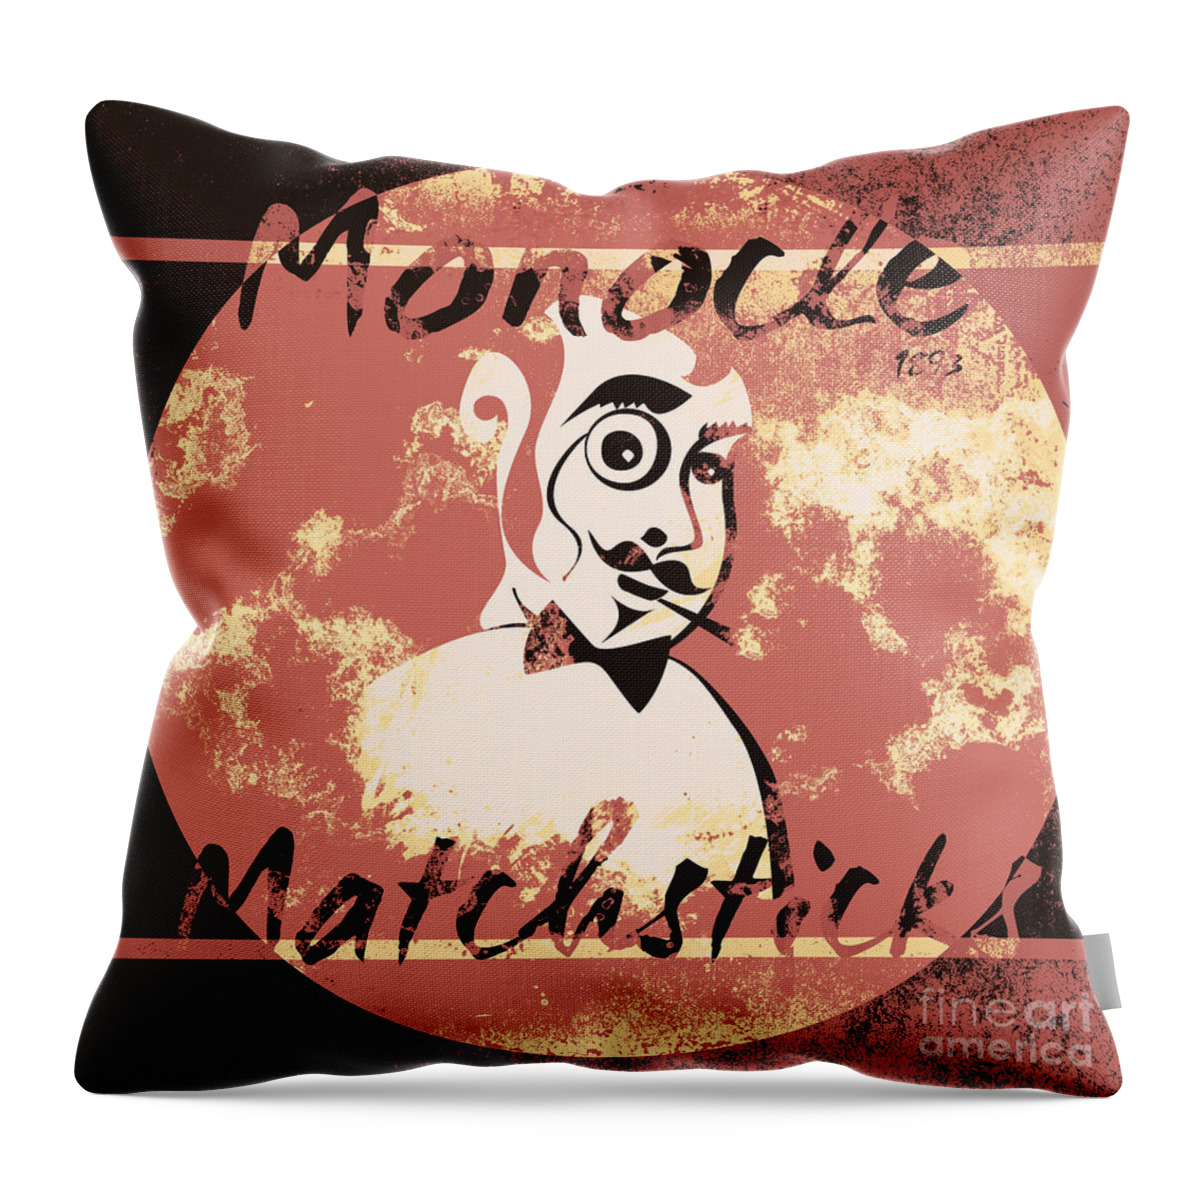 Matches Throw Pillow featuring the photograph Monocle Matchsticks vintage tin sign advertising by Jorgo Photography